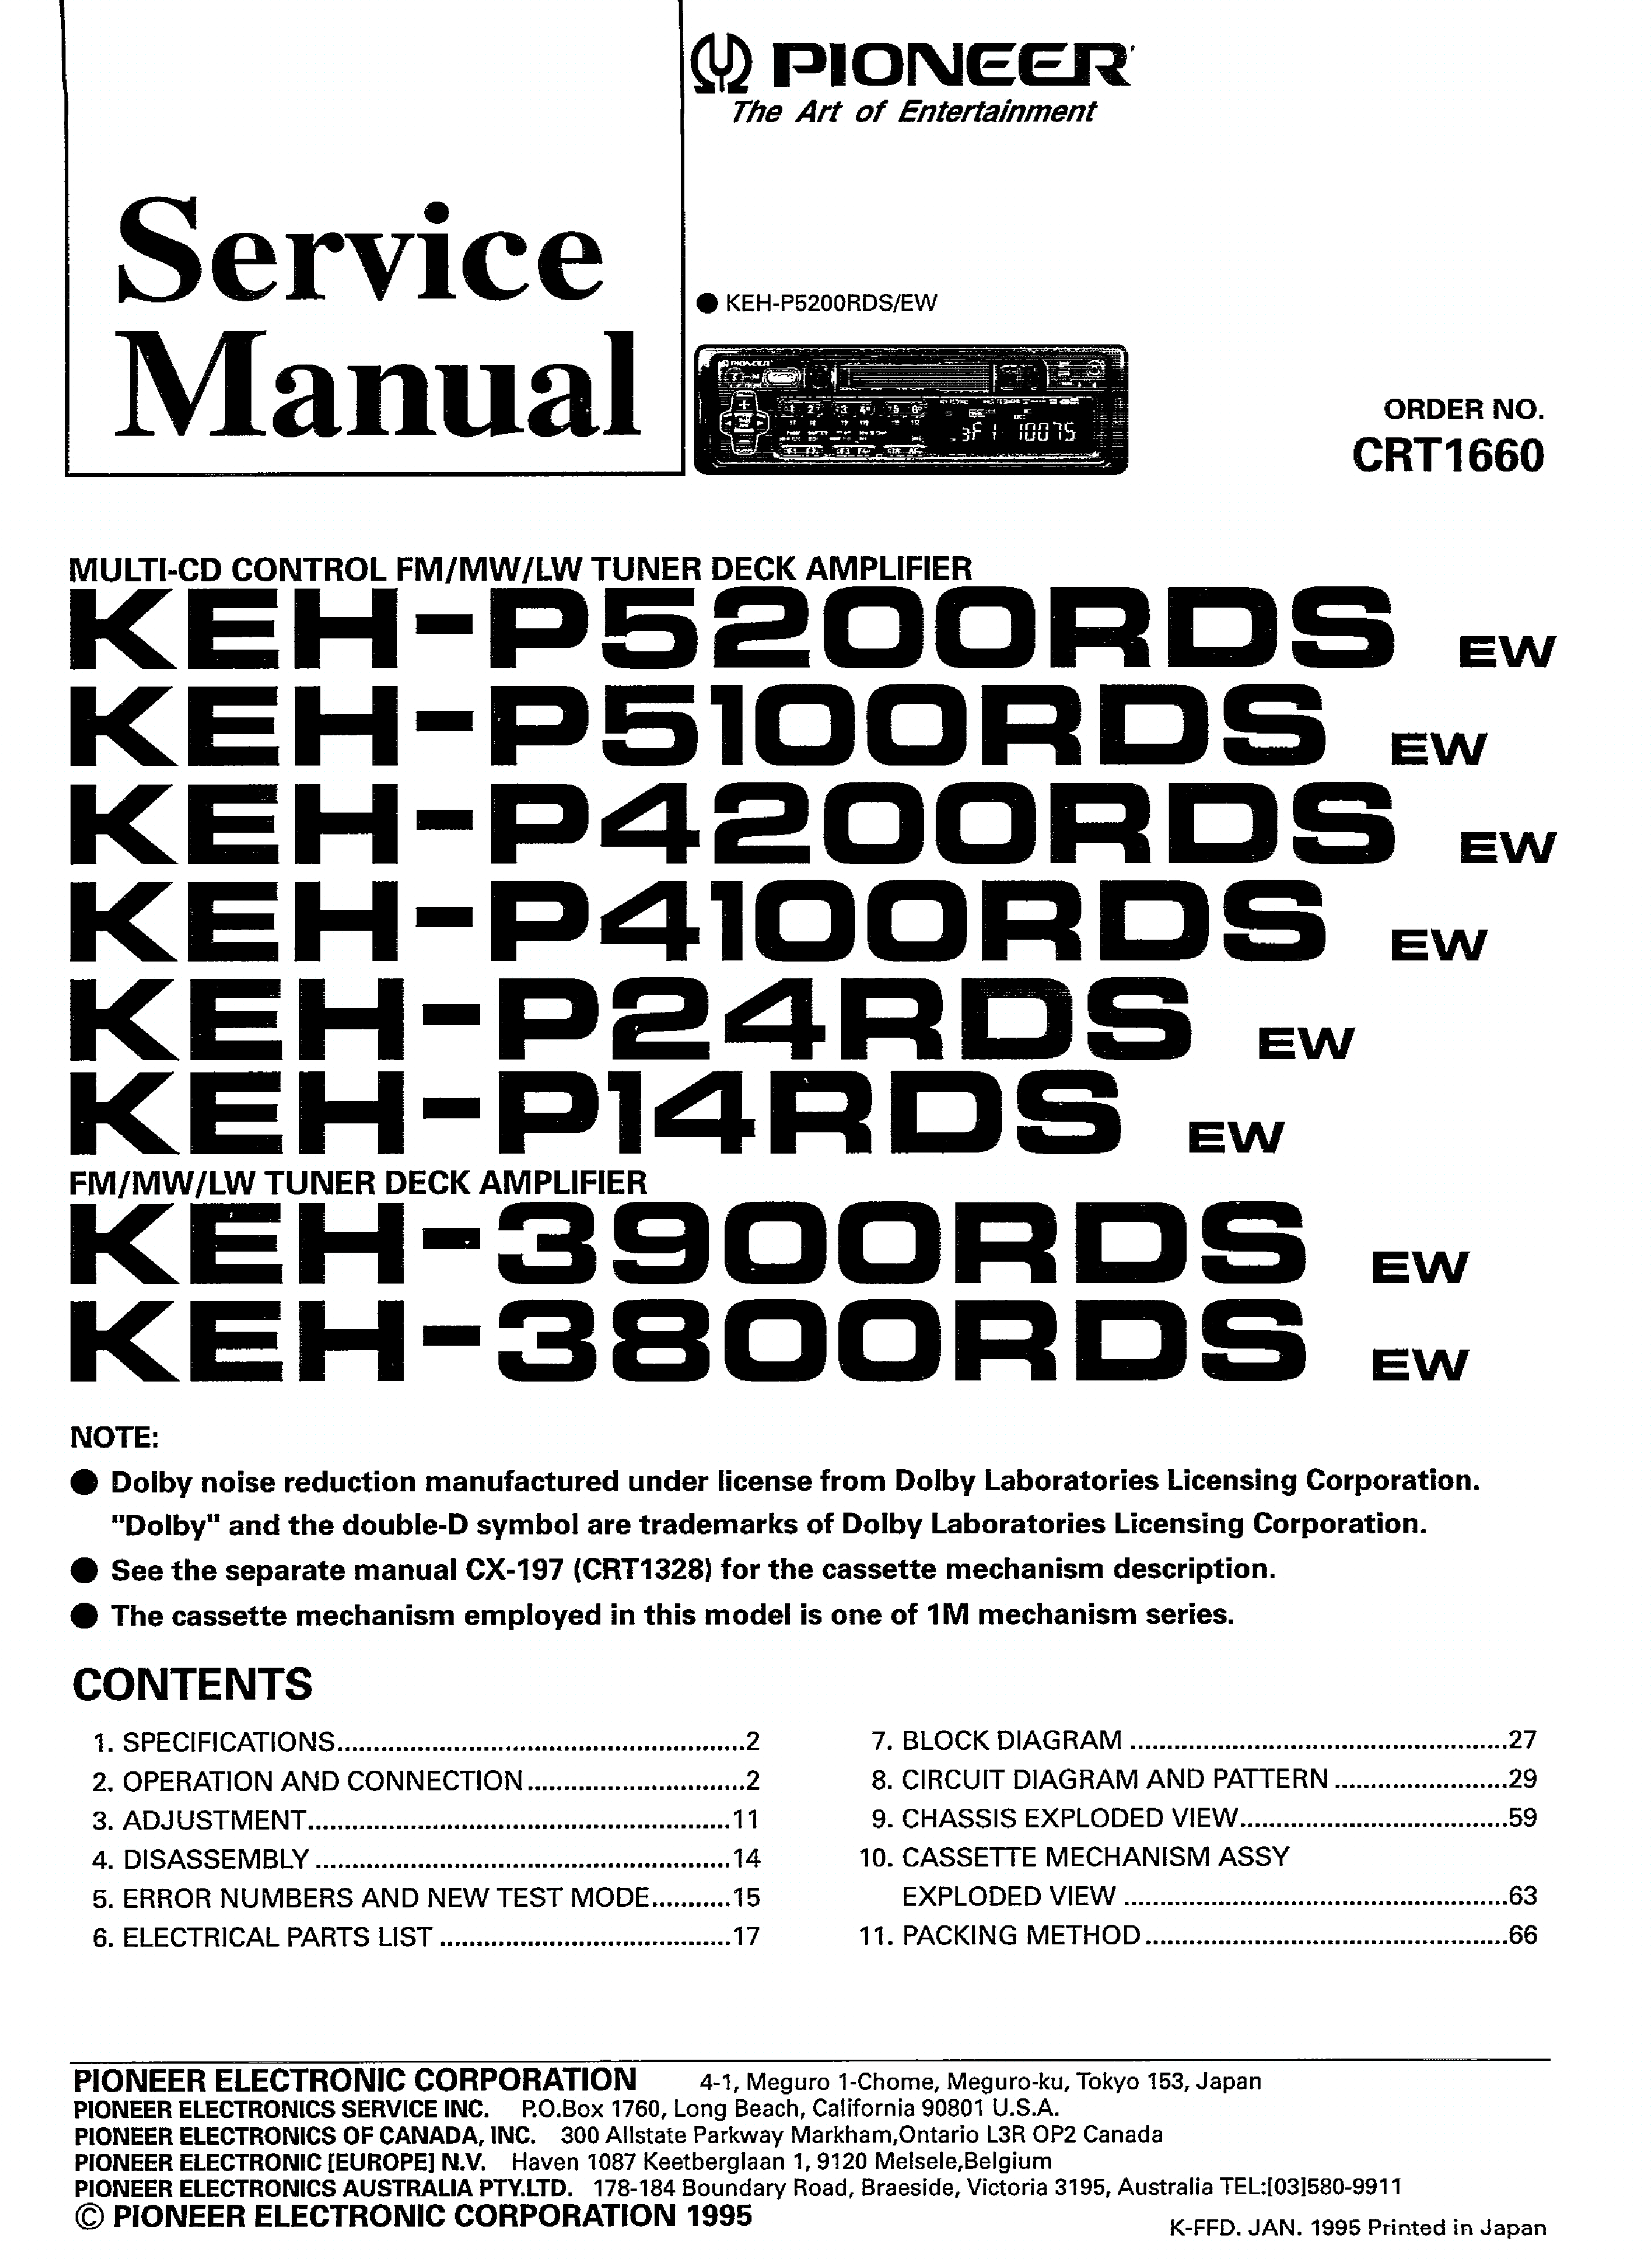 PIONEER KEH-P5200RDS P5100RDS P4200RDS P4100RDS service manual (1st page)